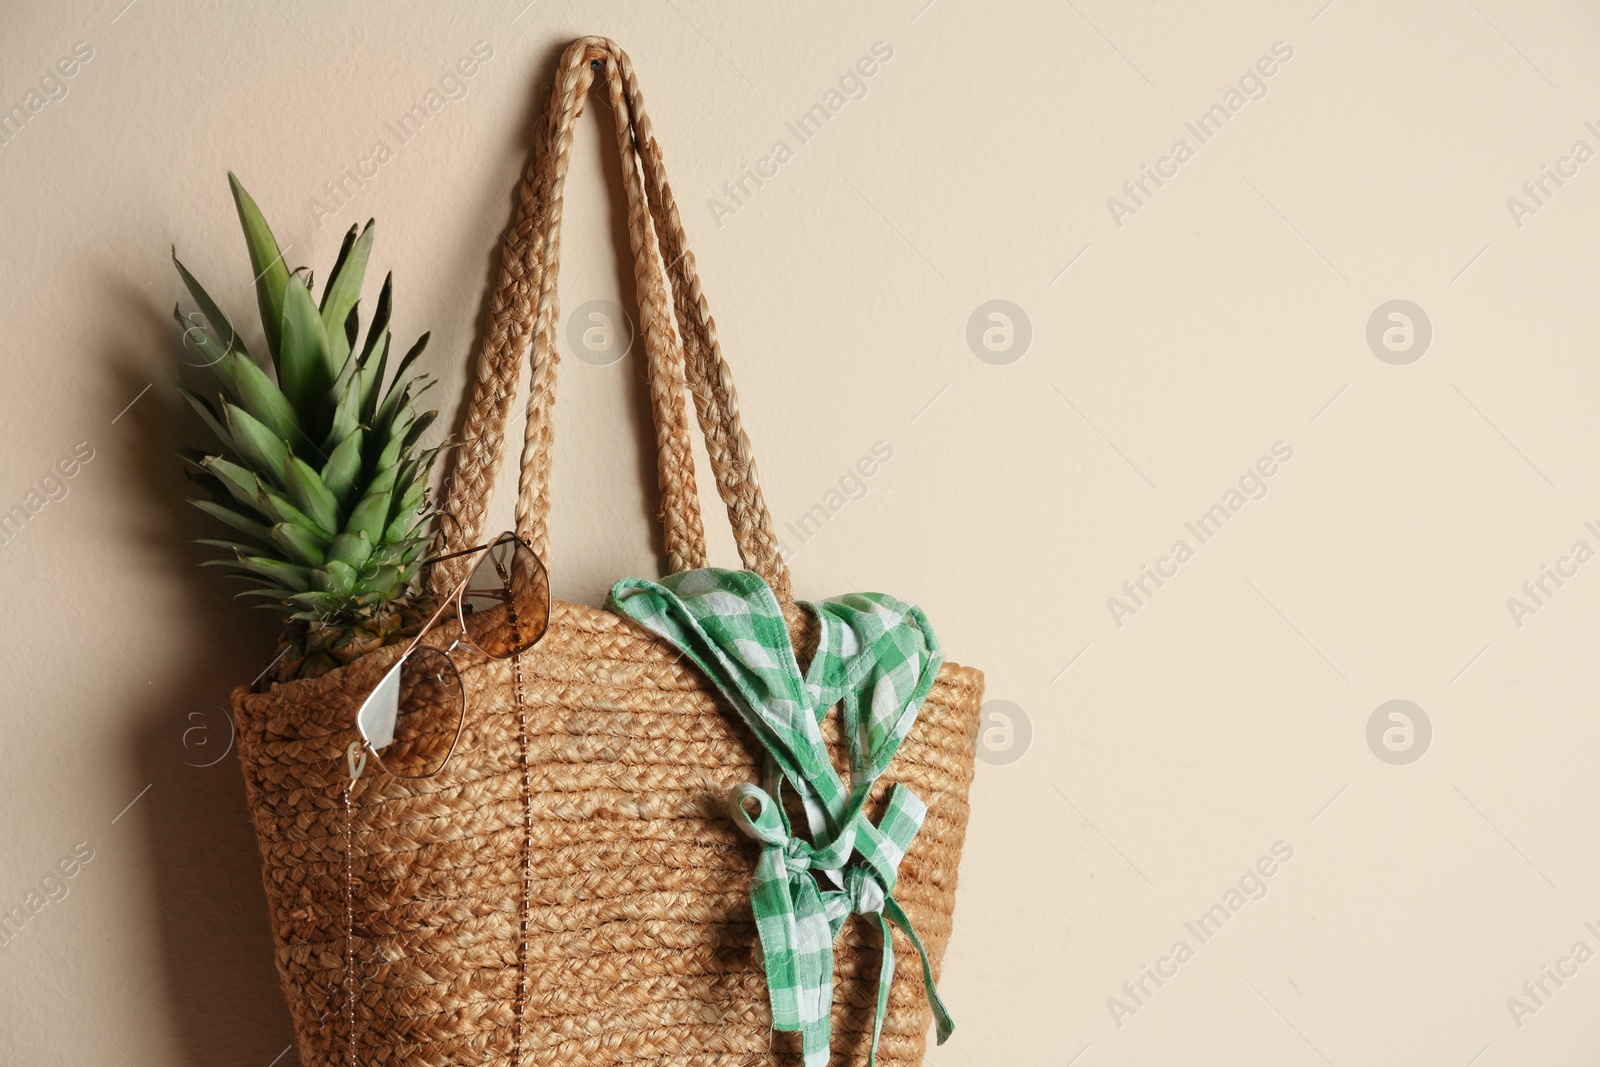 Photo of Elegant woman's straw bag with pineapple and accessories hanging on beige background. Space for text